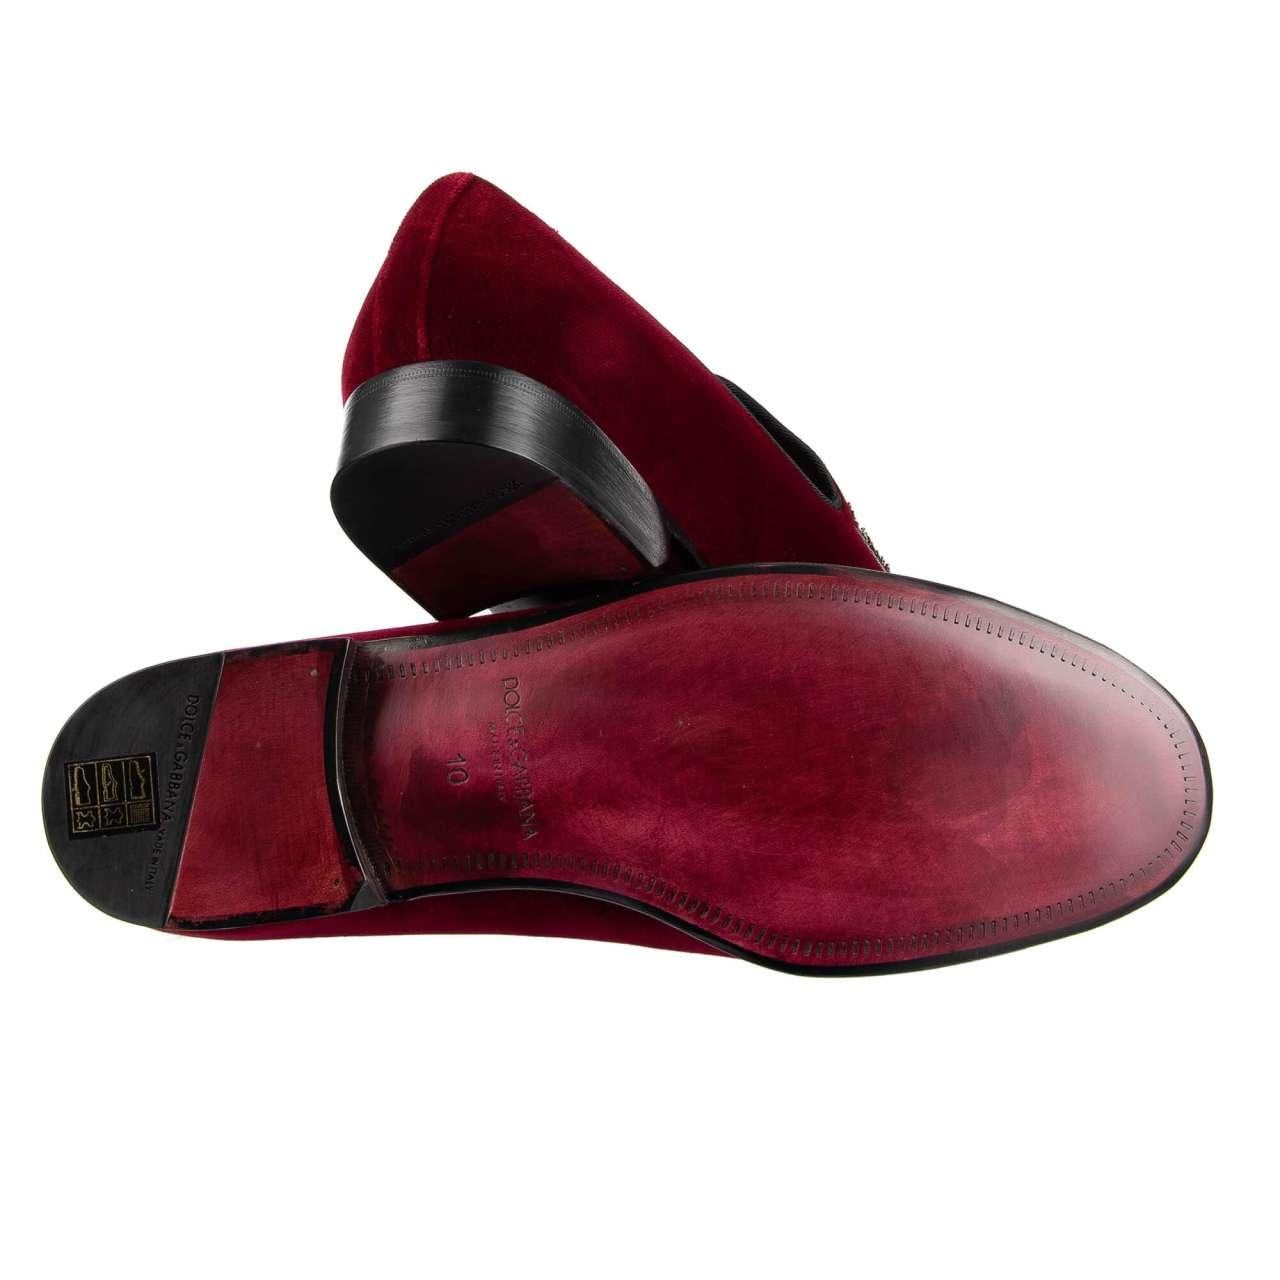 - Velvet Loafer MILANO with bee, crown and leafs embroidery made of gun metal by DOLCE & GABBANA - RUNWAY - Dolce & Gabbana Fashion Show - MADE IN ITALY - New with Box - Former RRP: EUR 1.450 - Model: A50001-AD485-8R349 - Material: Velvet, 100%